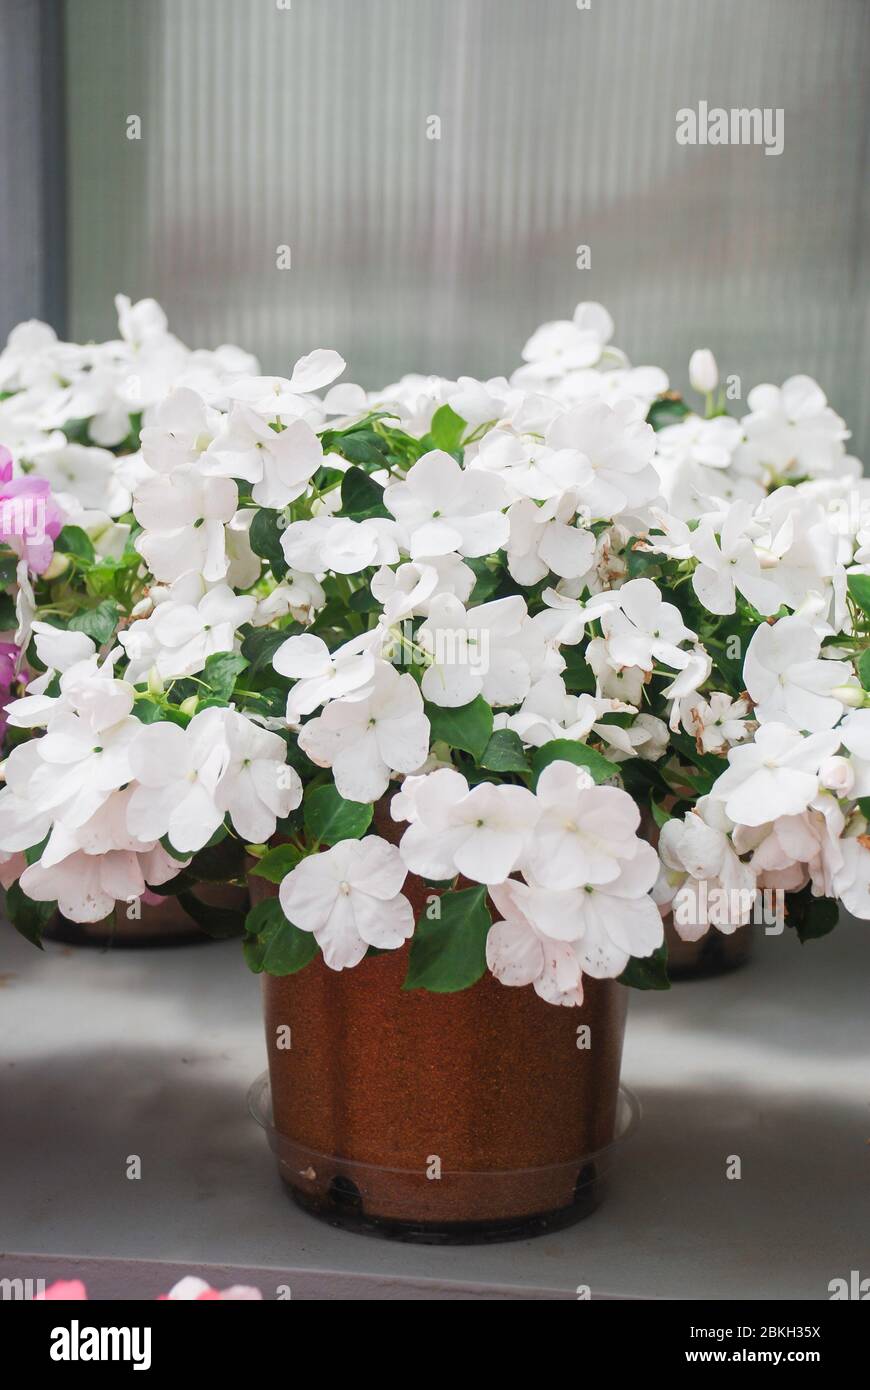 white impatiens in potted, scientific name Impatiens walleriana flowers also called Balsam, flowerbed of blossoms in white Stock Photo